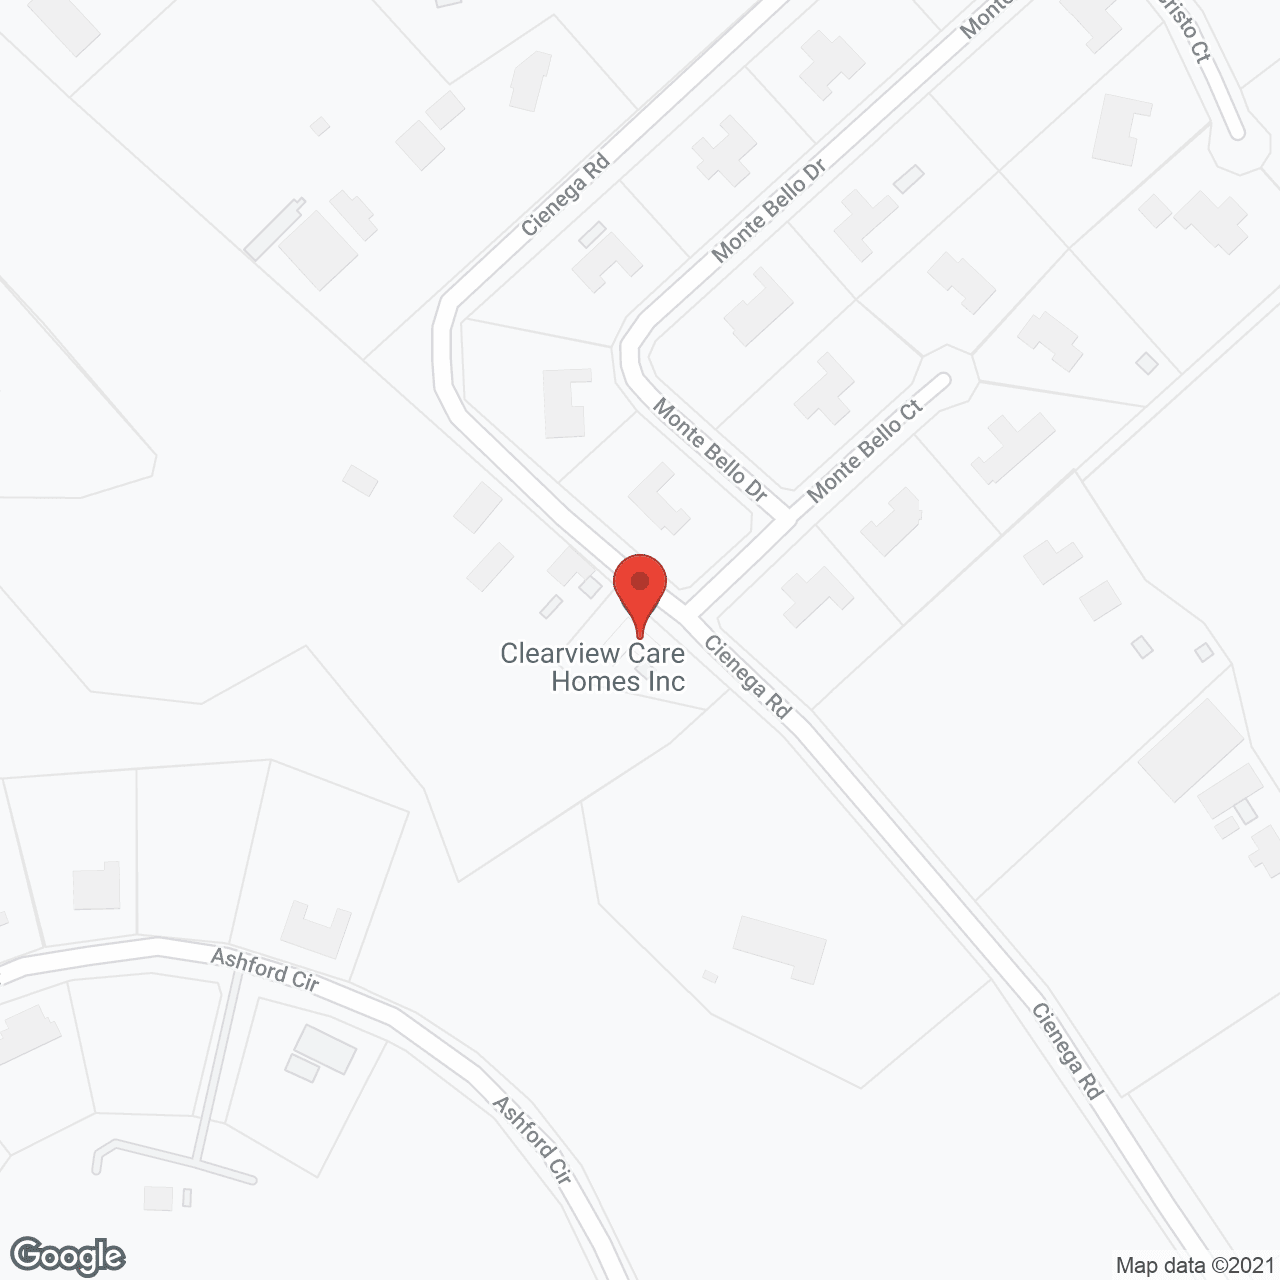 Clearview Care Homes, Inc. in google map